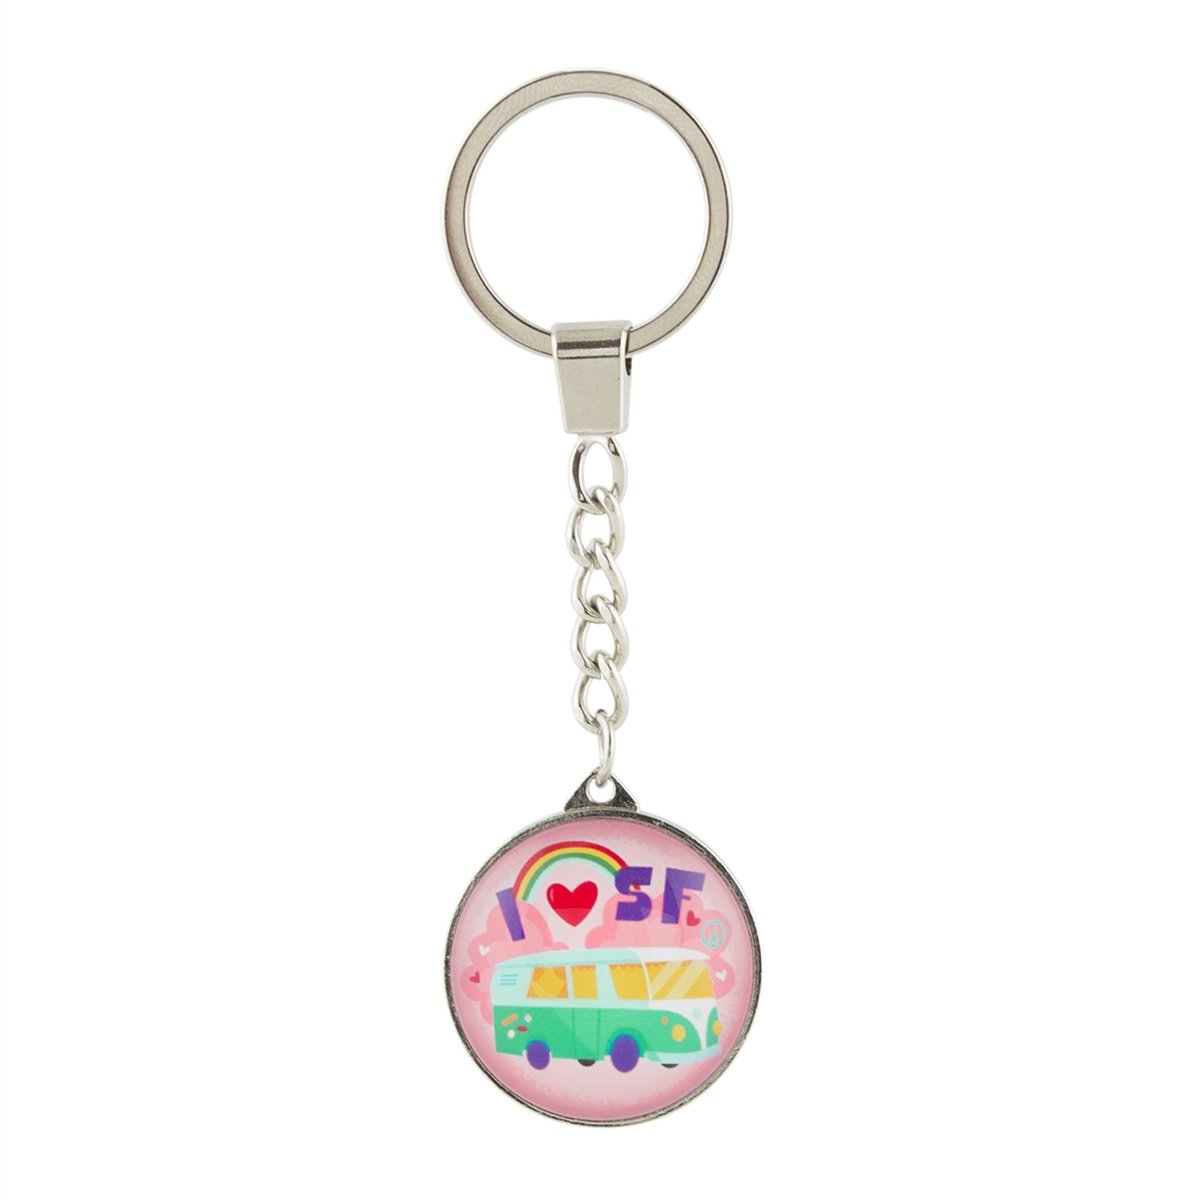 Whimsical I Heart San Francisco crystal keychain with vintage-inspired illustrations of VW van and rainbow.